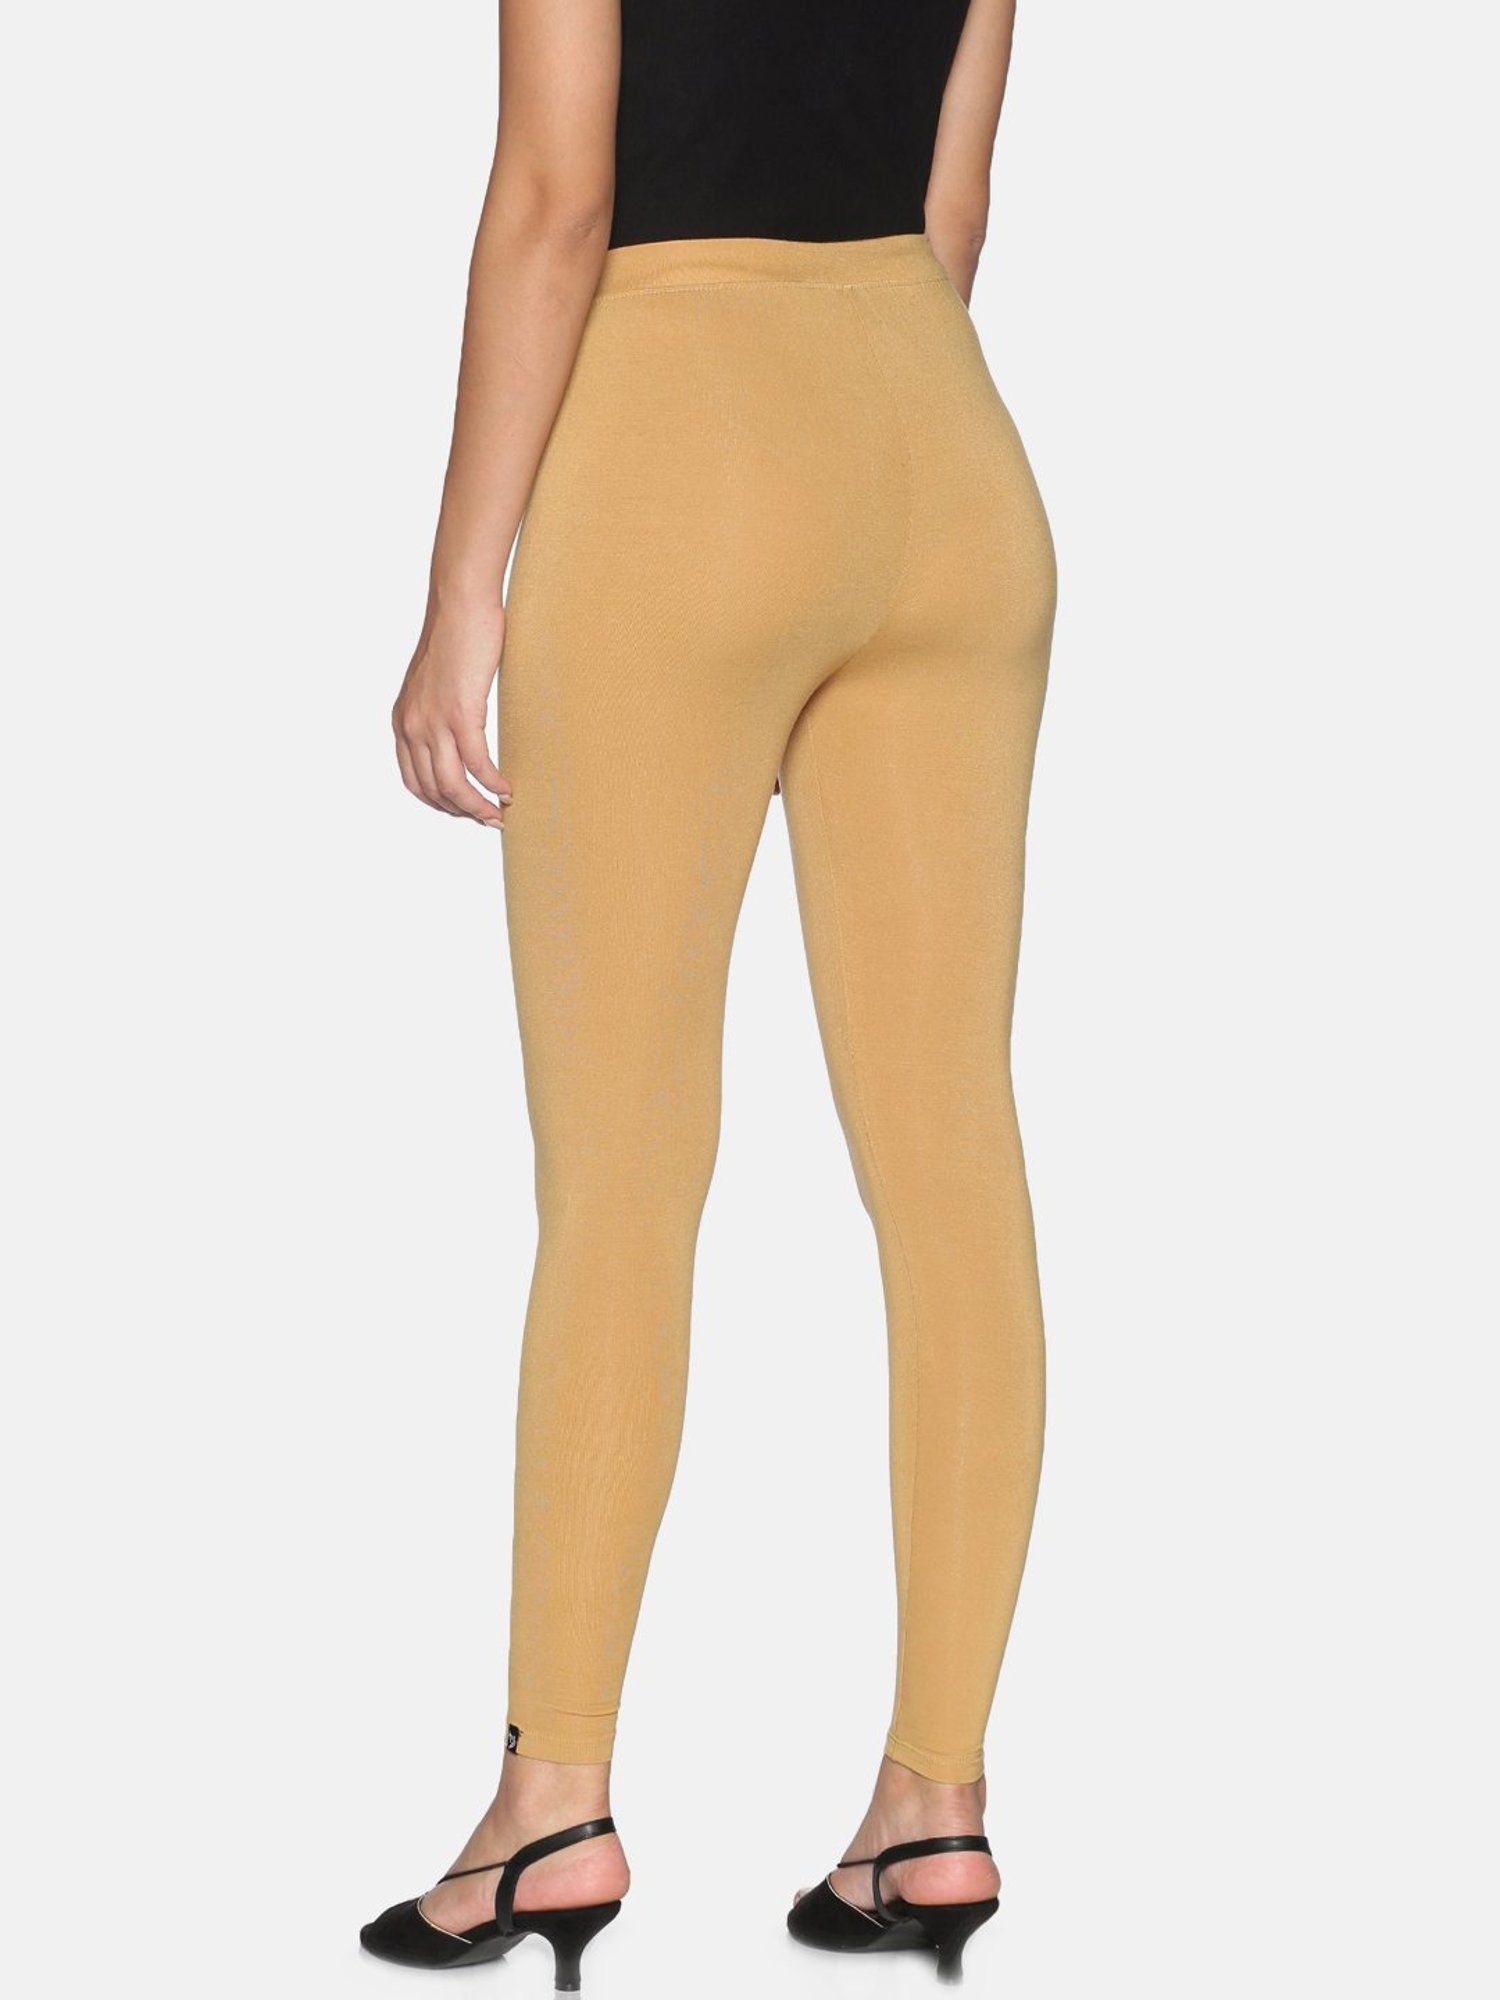 Buy Tight Churidar Leggings for Ladies- All Colors – Twin Birds Store